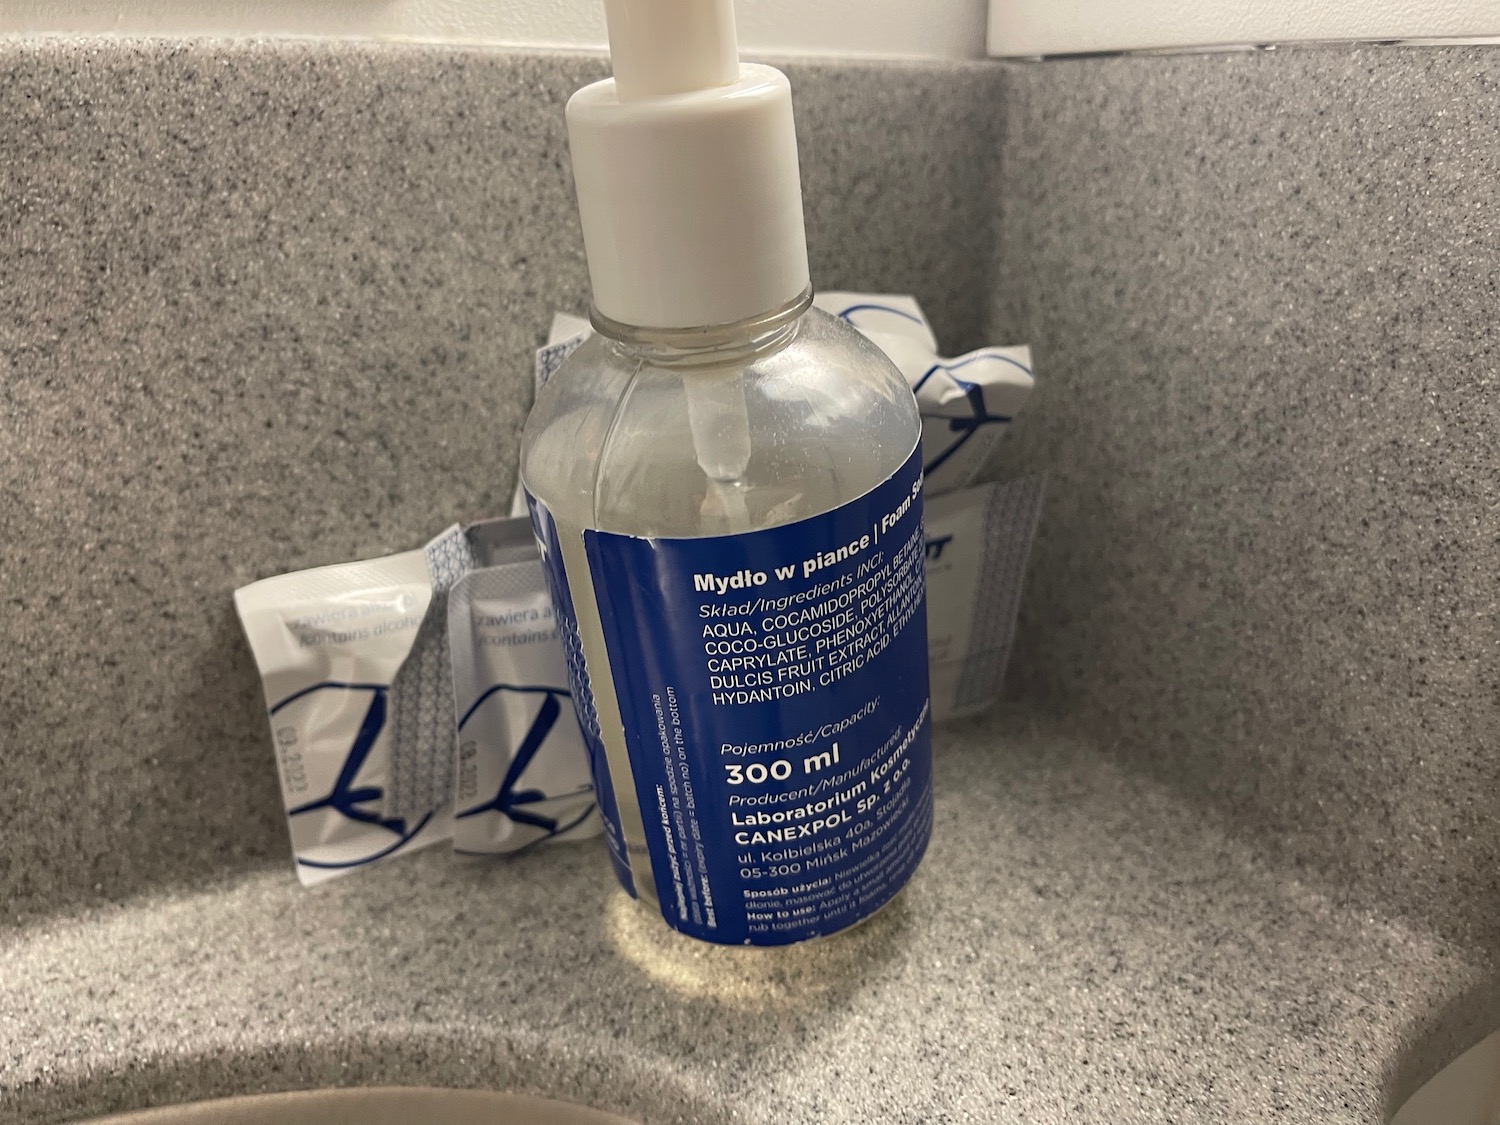 a bottle of liquid on a counter